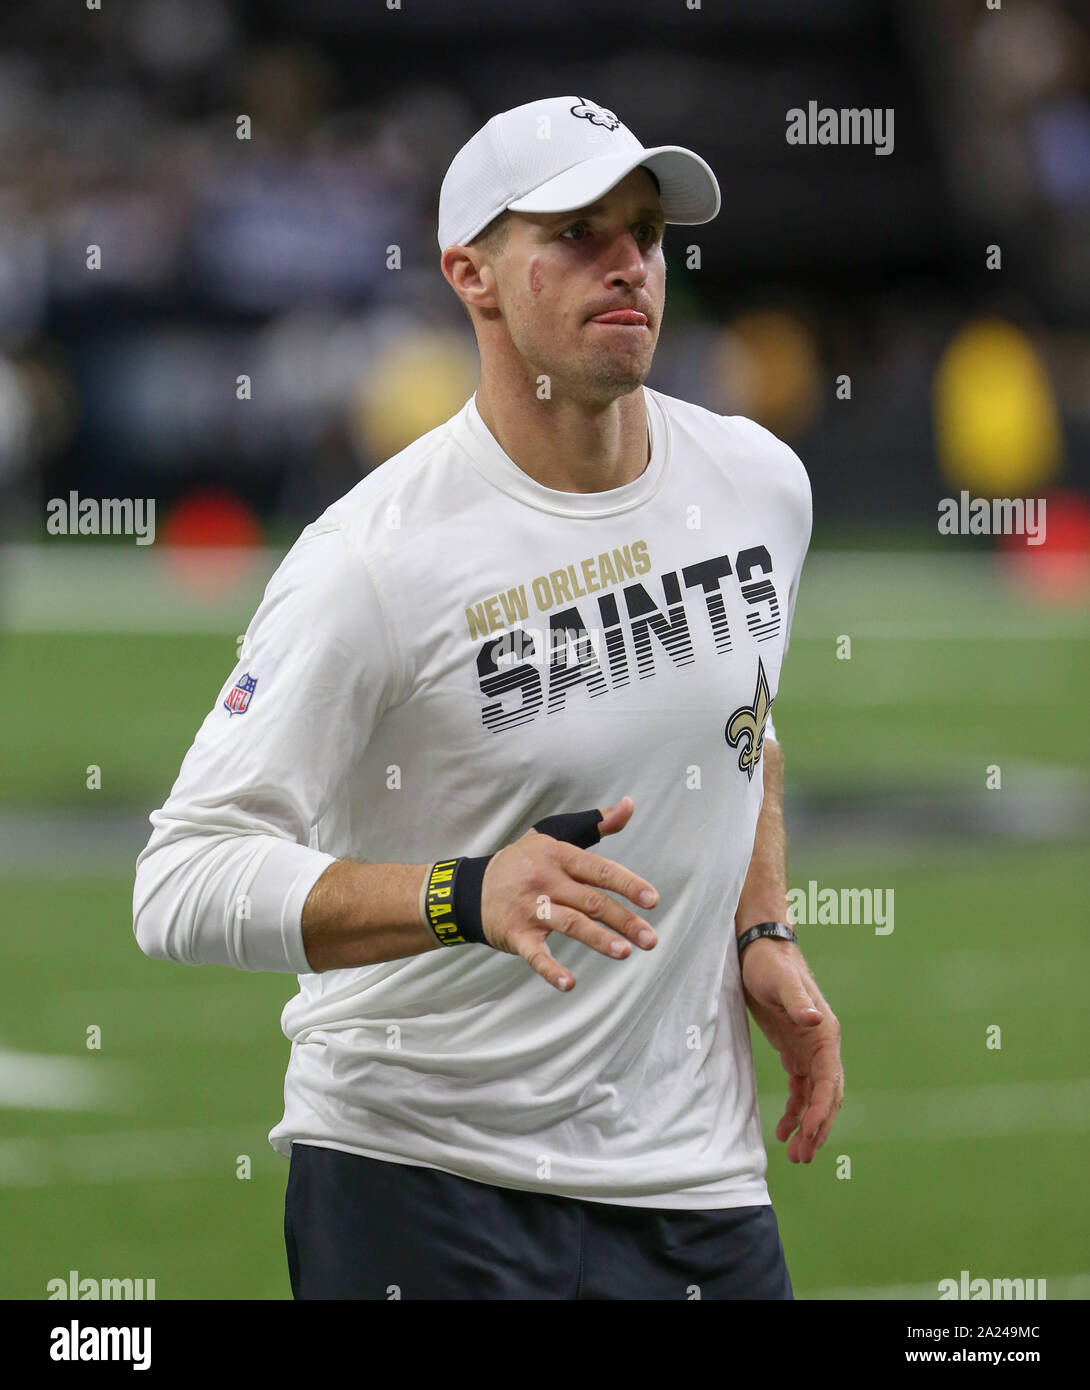 New Orleans, LA, USA. 29th Sep, 2019. New Orleans Saints injured quarterback Drew Brees runs to the locker room after pre game warm ups before their game against the Dallas Cowboys at the Mercedes Benz Superdome in New Orleans, LA. Jonathan Mailhes/CSM/Alamy Live News Stock Photo